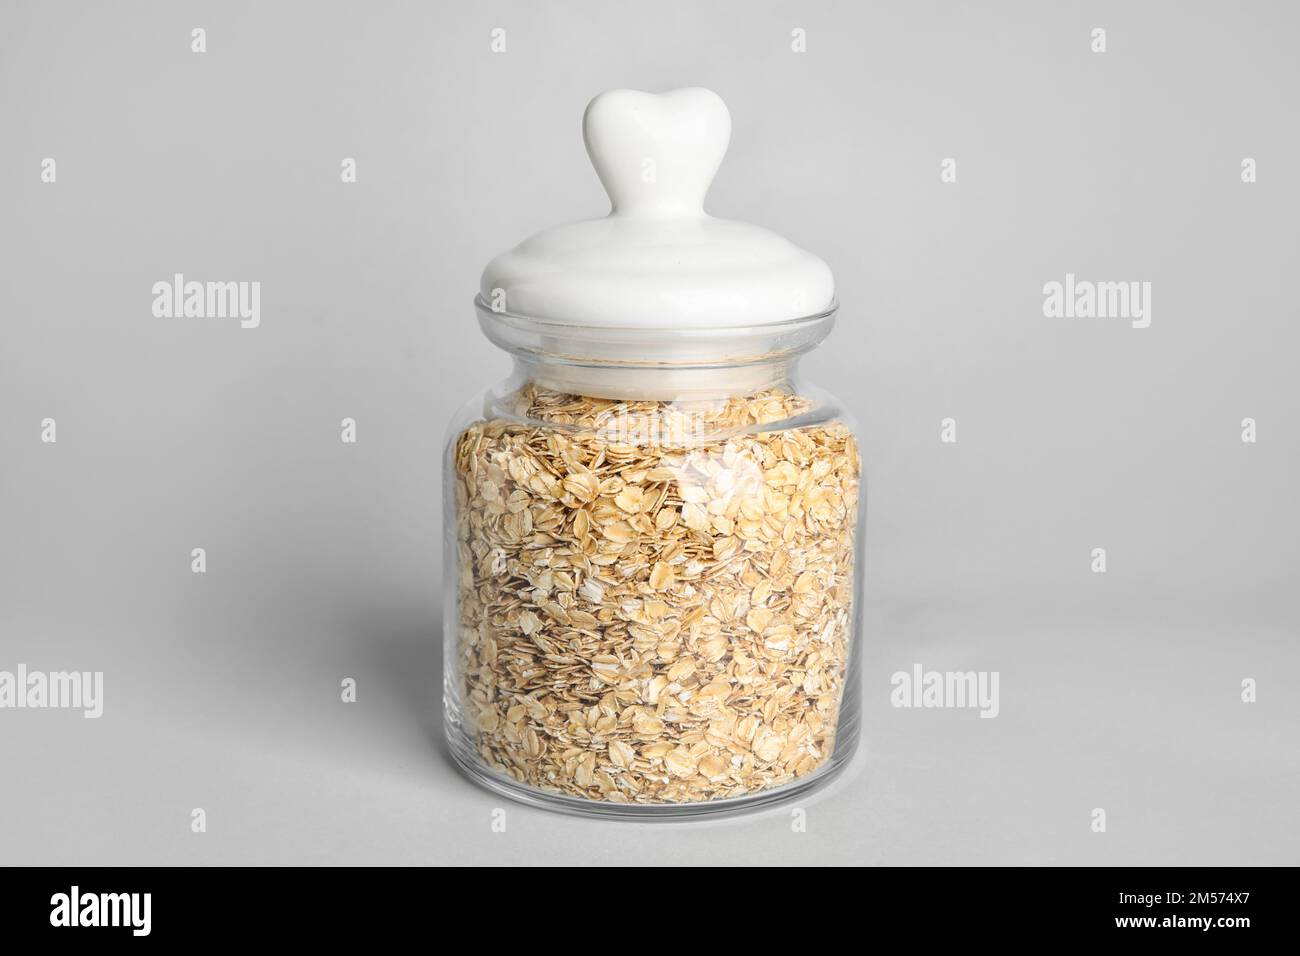 Neatly Organized Transparent Canisters For Baking Ingredients Stock Photo -  Download Image Now - iStock